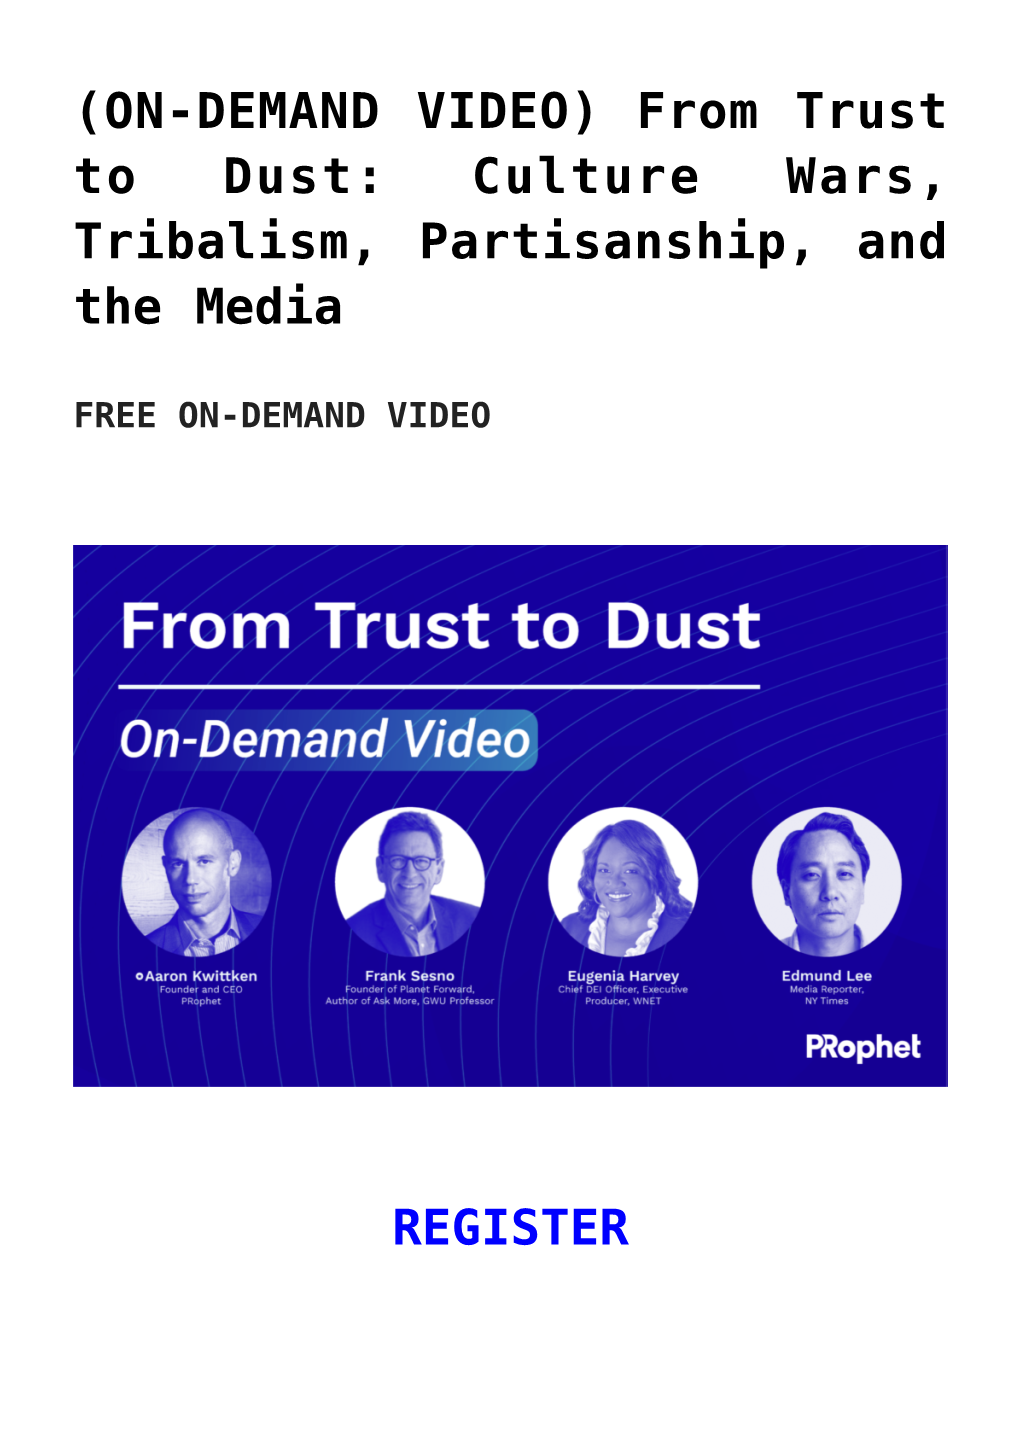 From Trust to Dust: Culture Wars, Tribalism, Partisanship, and the Media